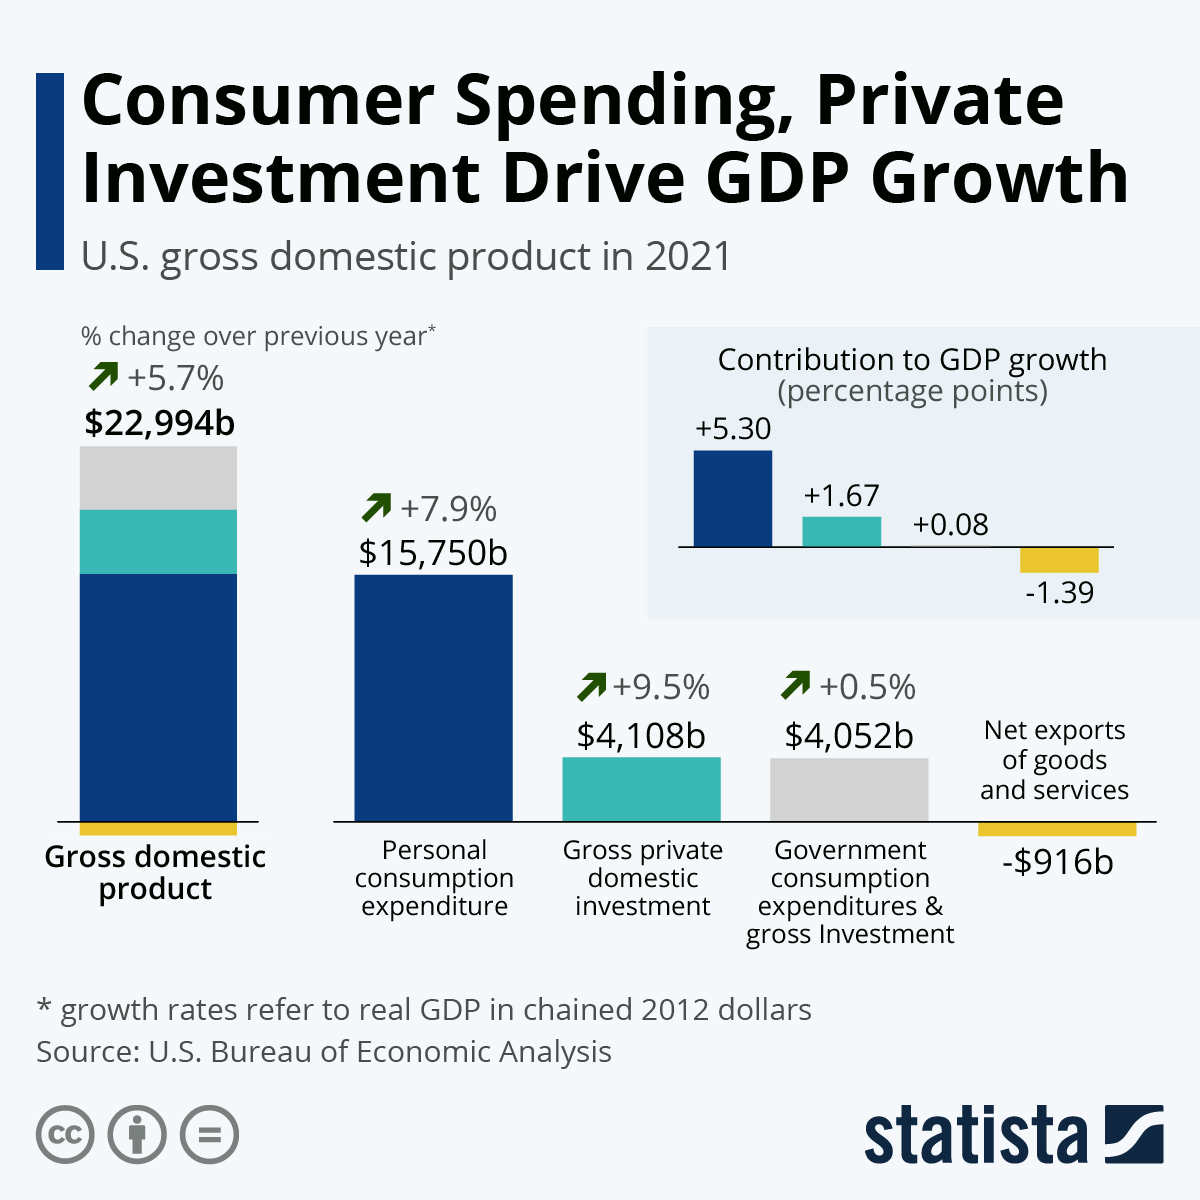 Consumer Spending, Private Investment Drive GDP Growth